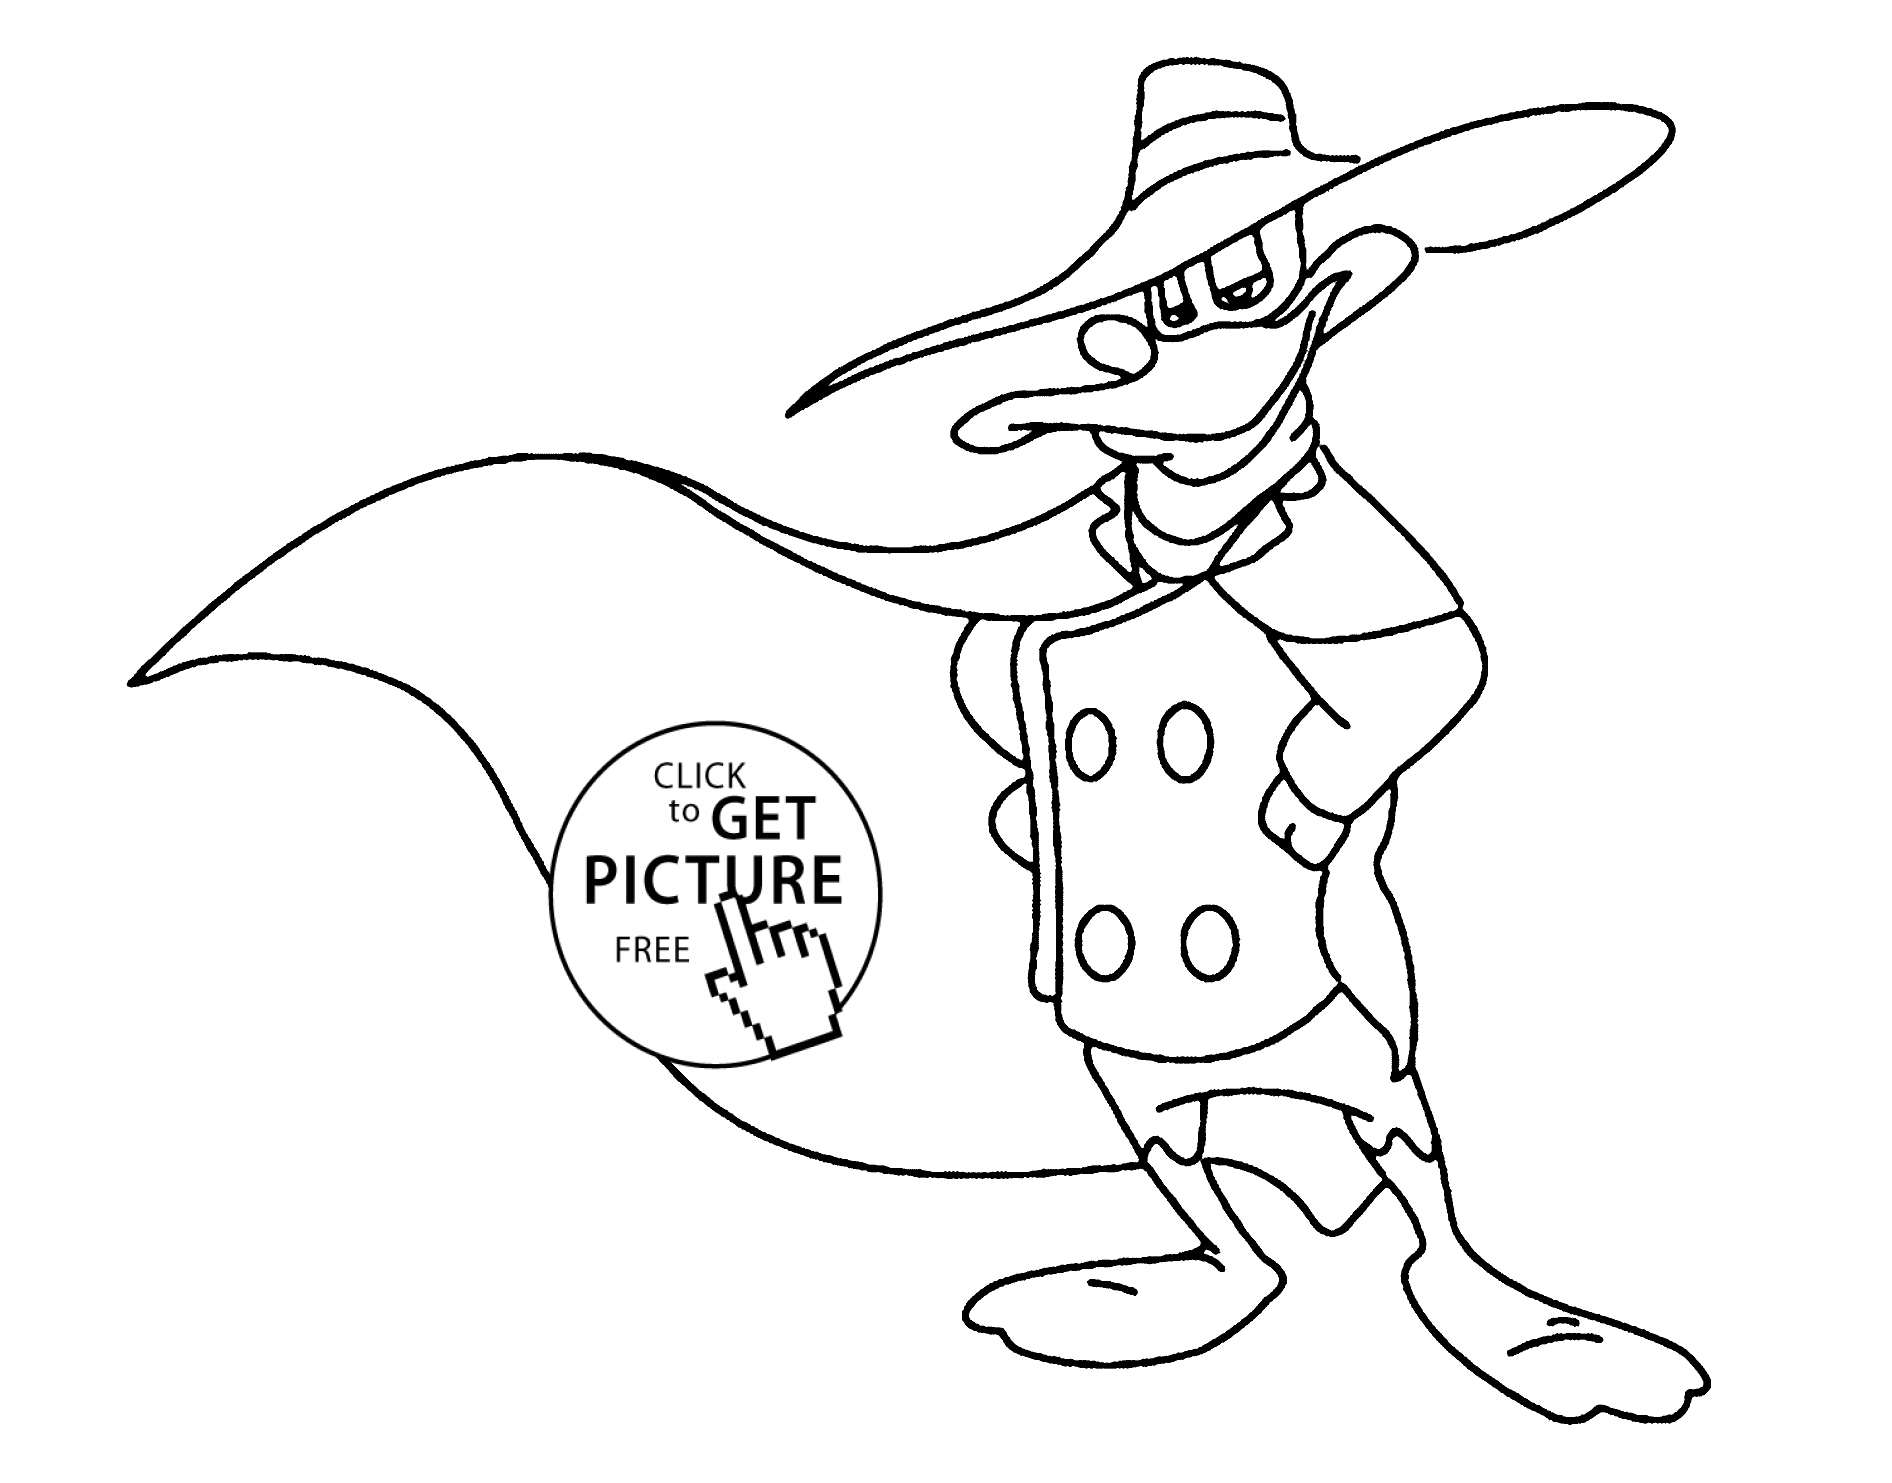 Download Darkwing Duck Coloring Pages - Coloring Home